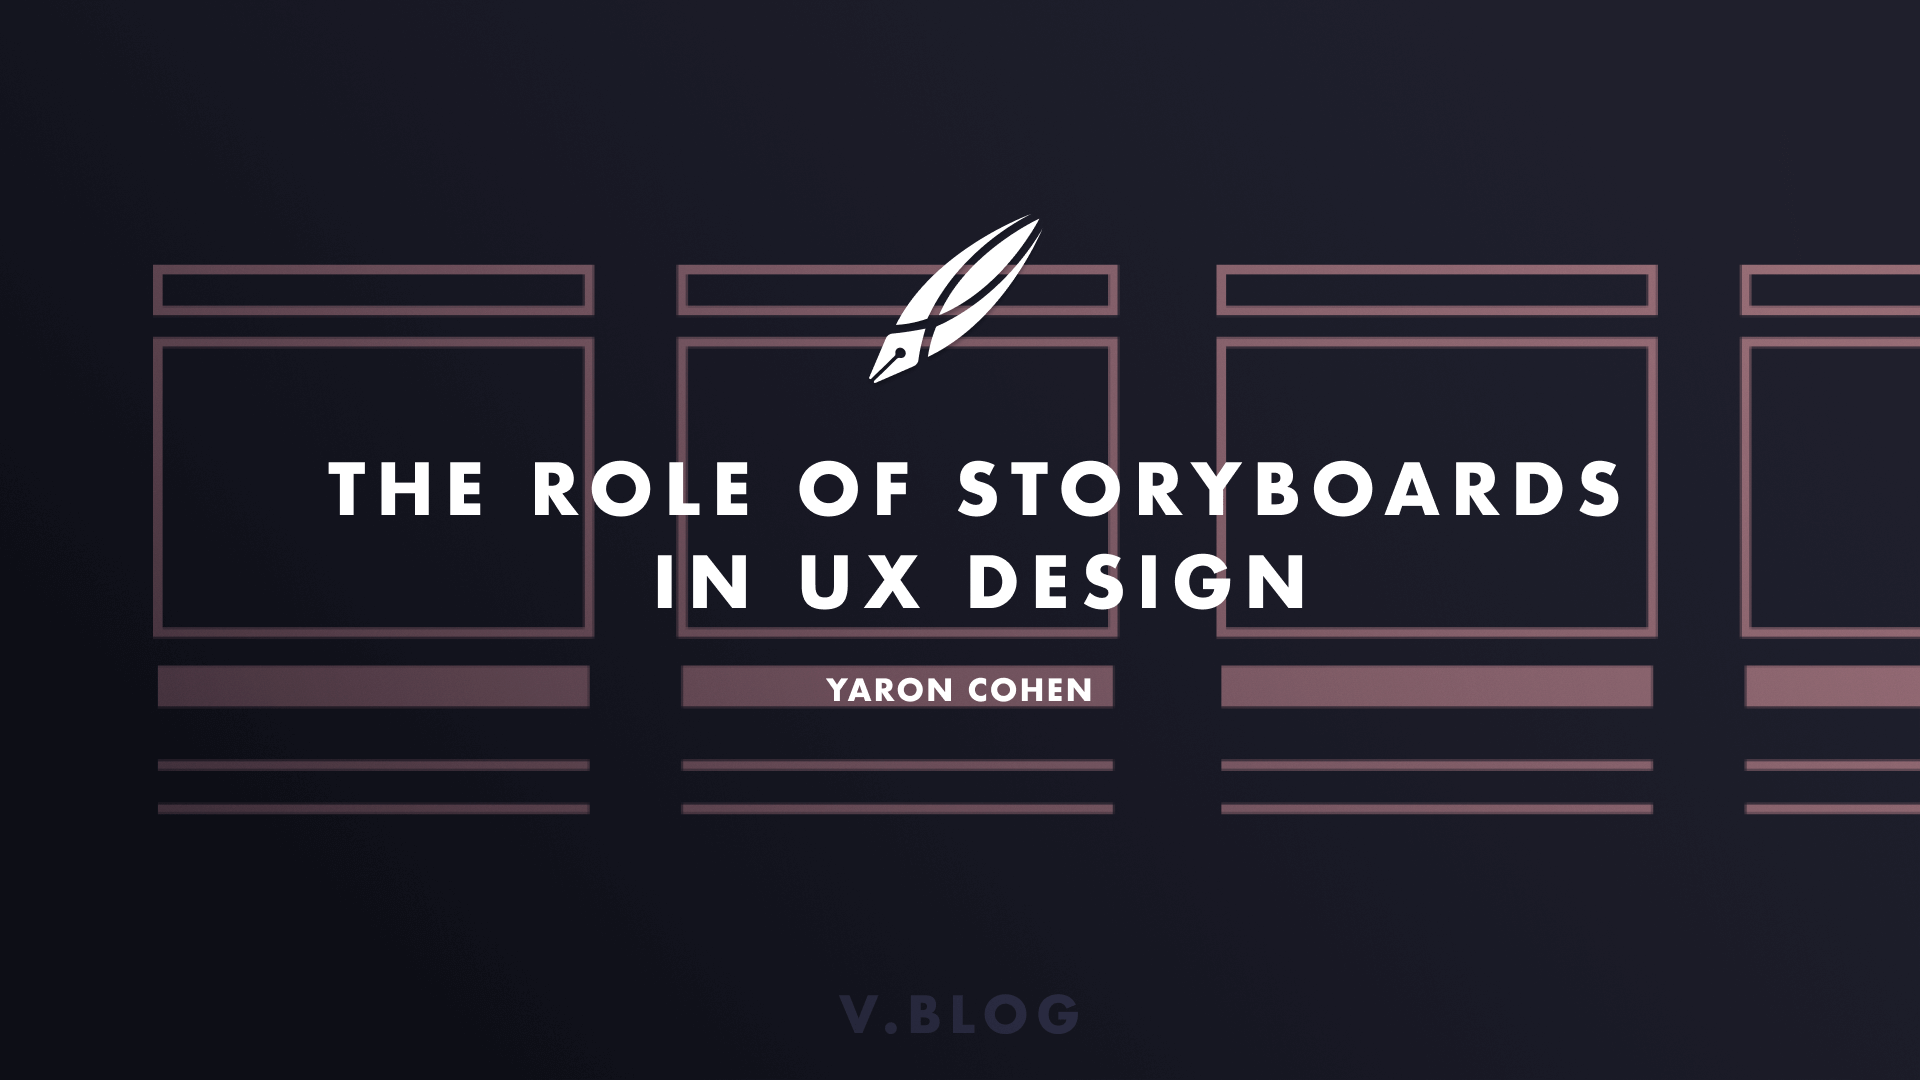 The Role Of Storyboards In UX Design